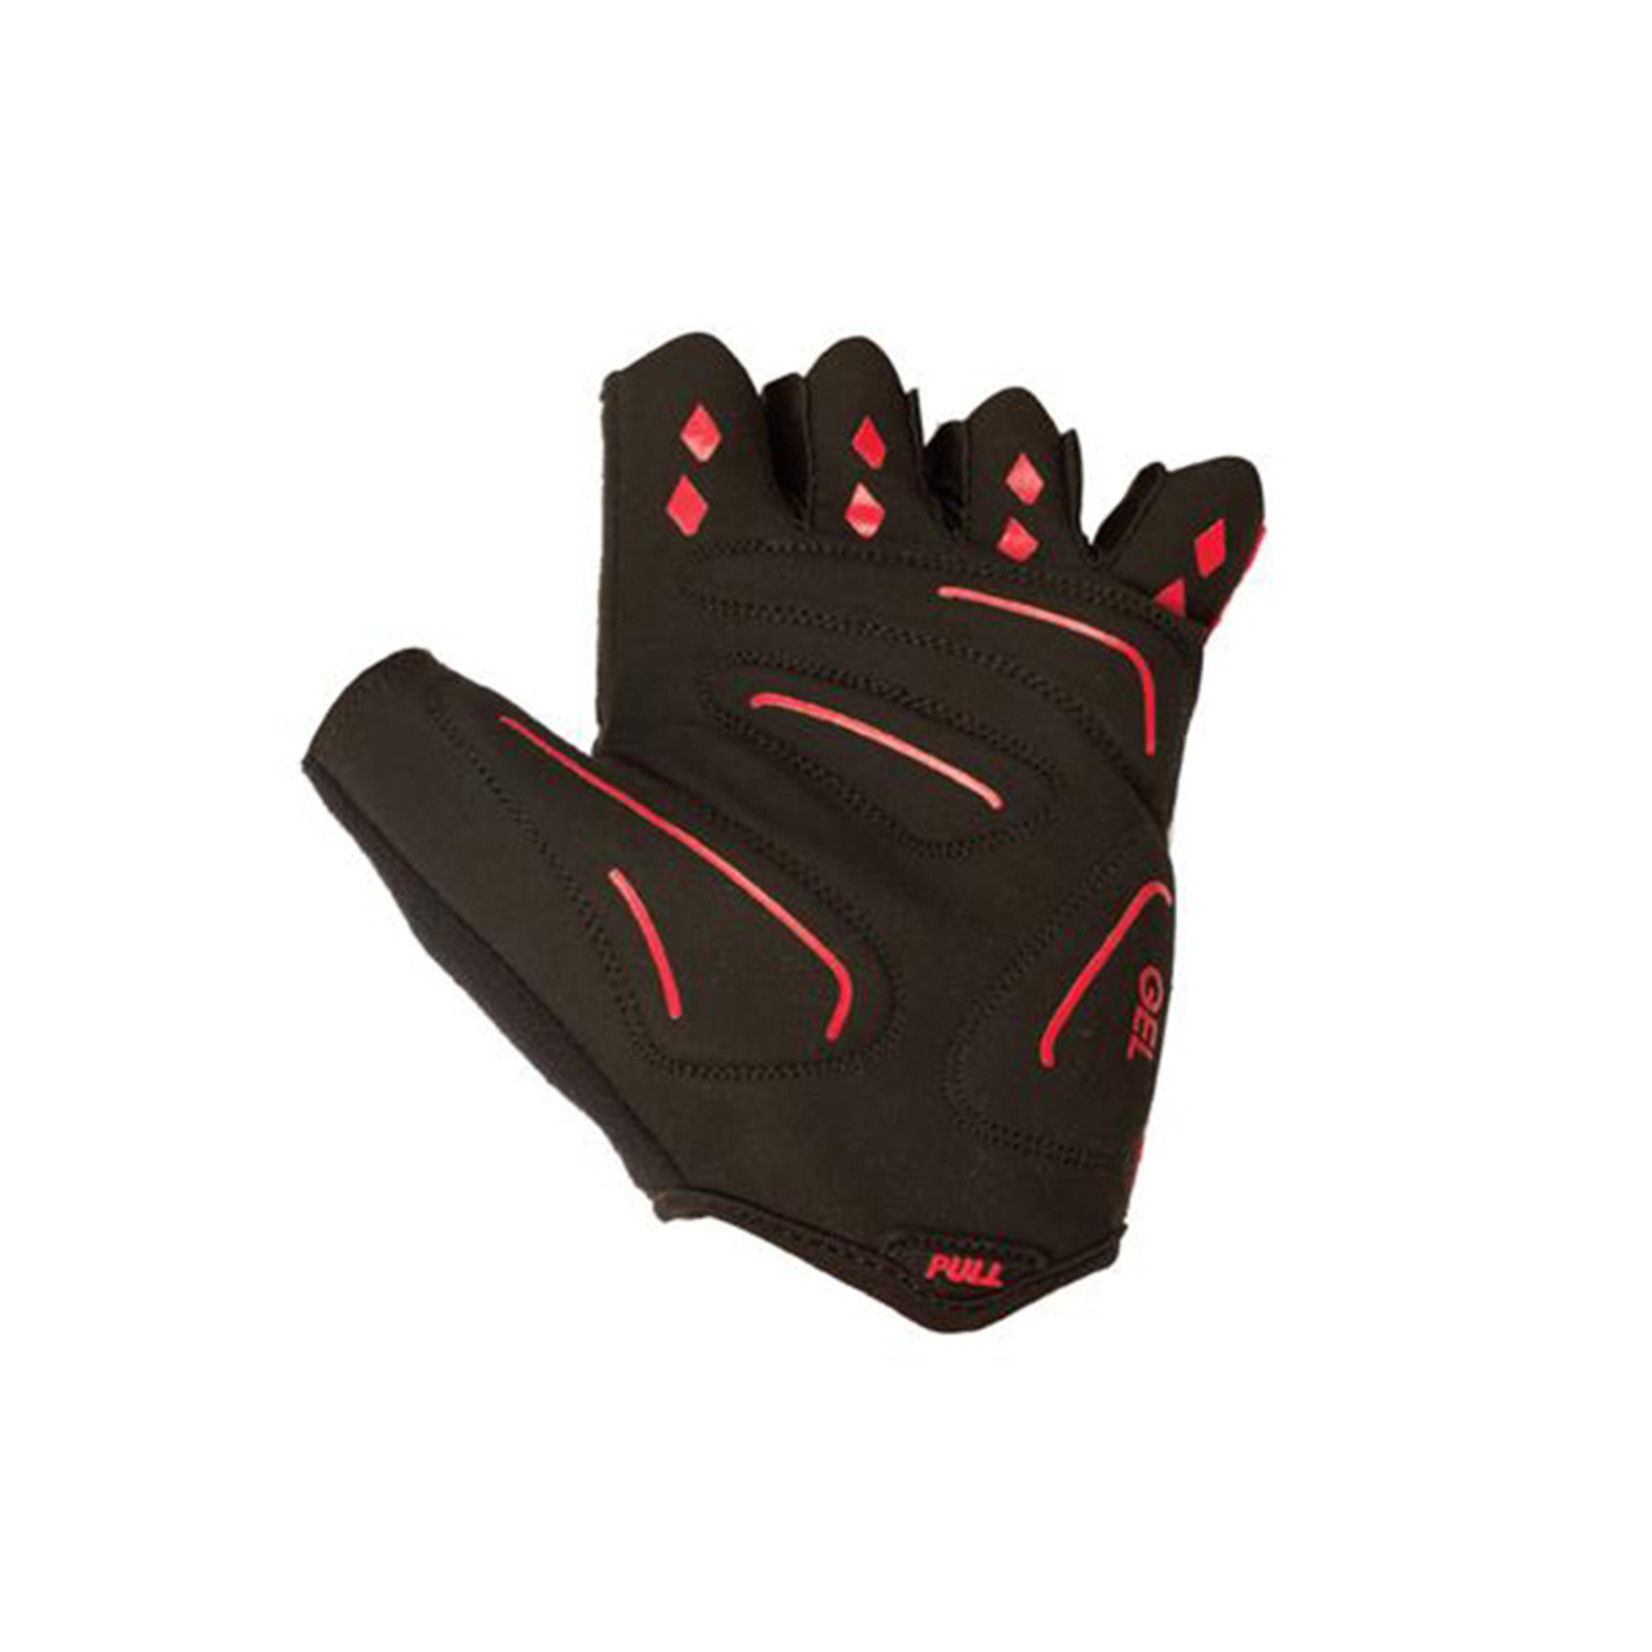 Azur Azur Bike/Cycling Glove - S6 Series - Synthetic Palm - Red - Small